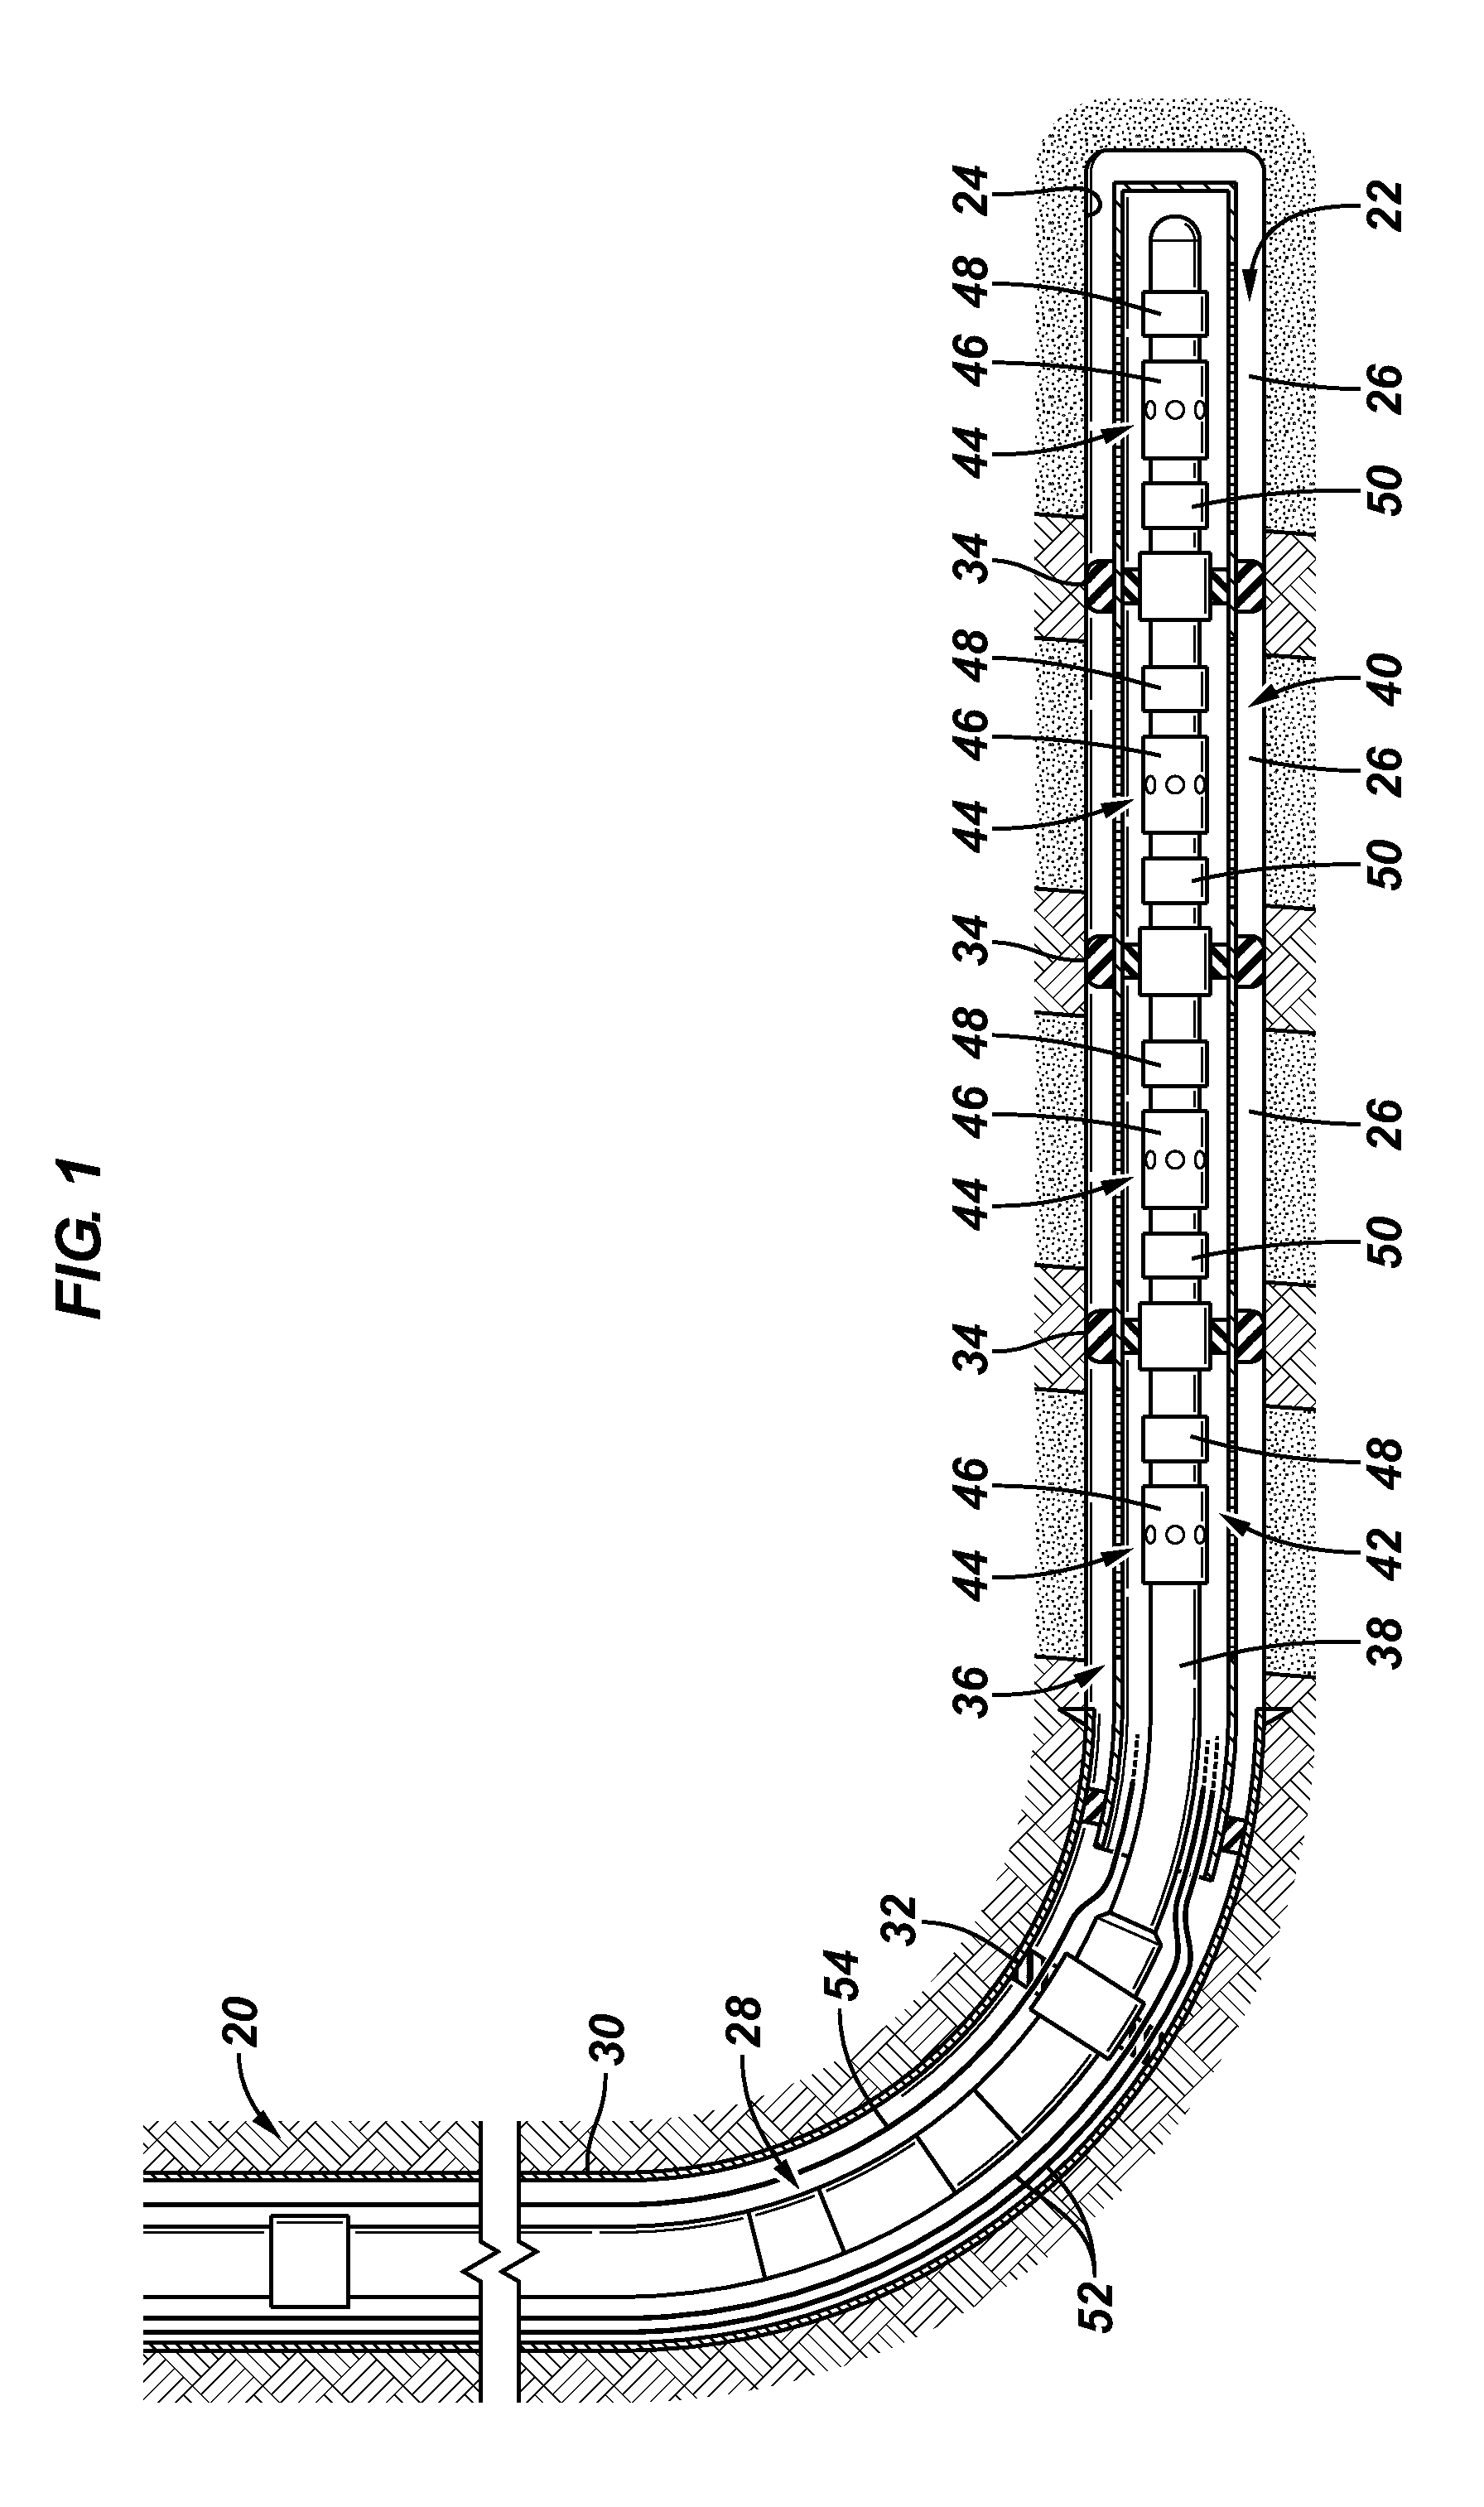 Chemical injection system